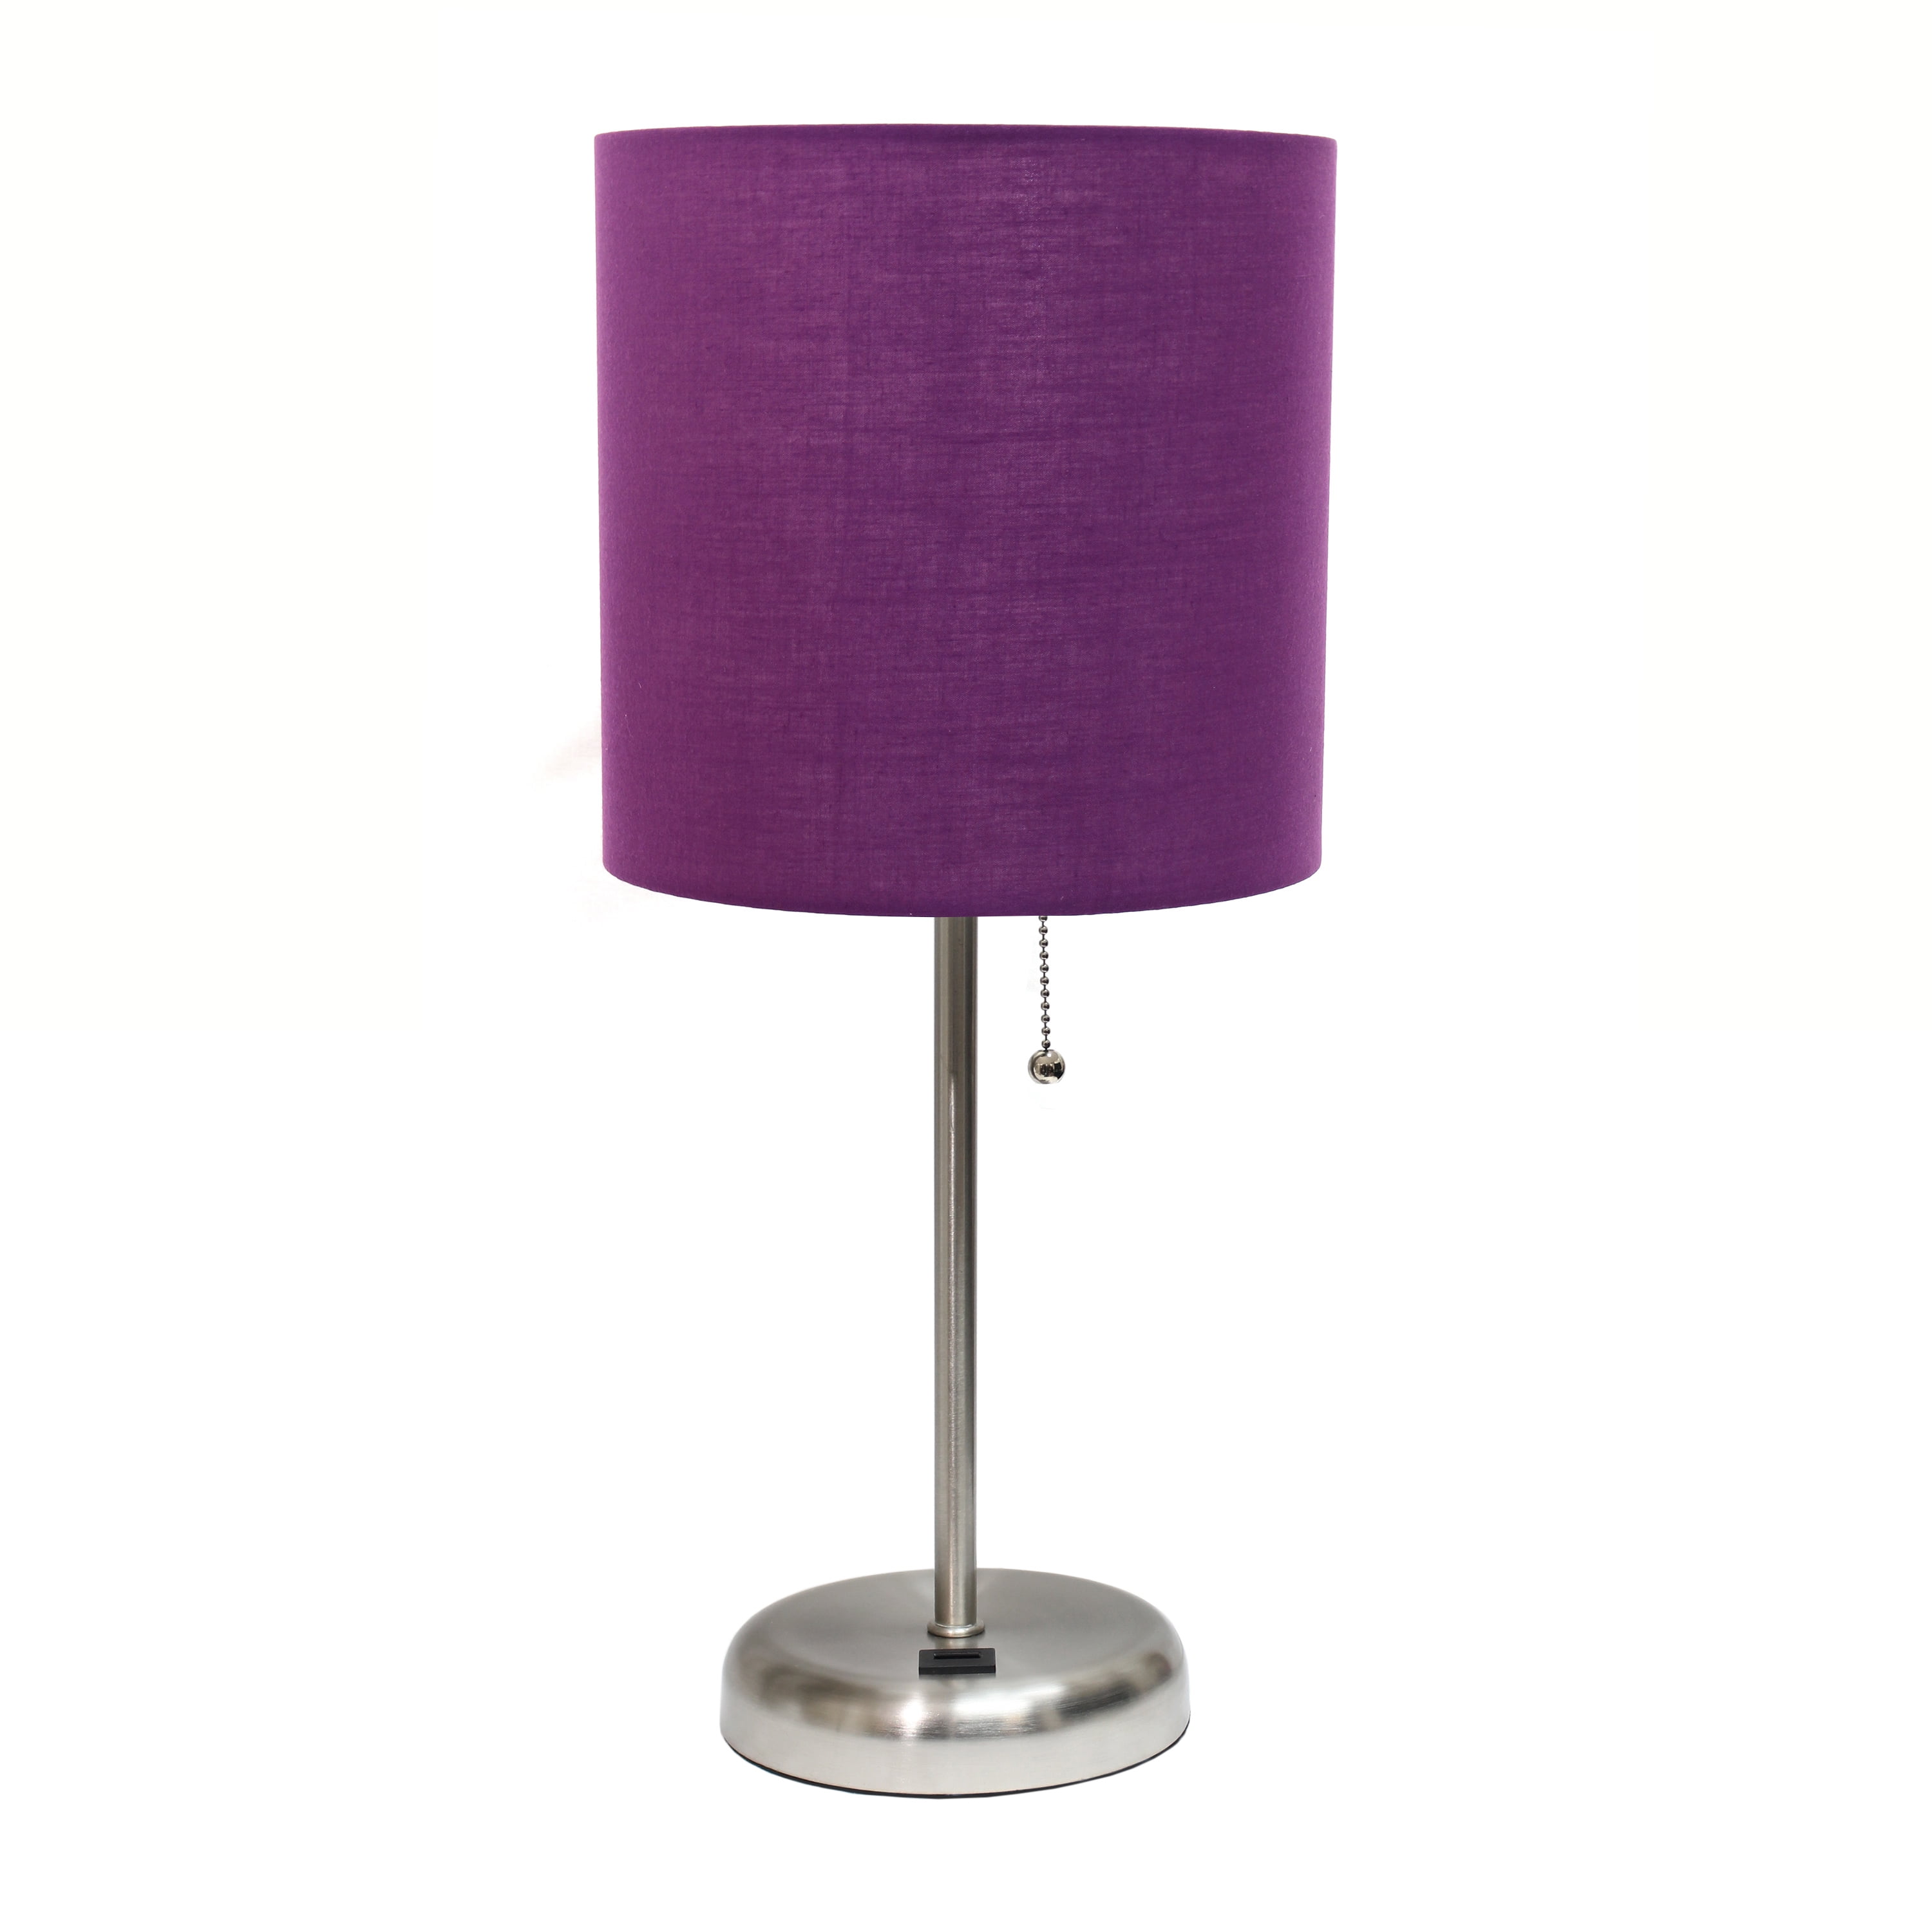 Lt2044-prp Stick Table Lamp With Usb Charging Port & Fabric Shade, Purple